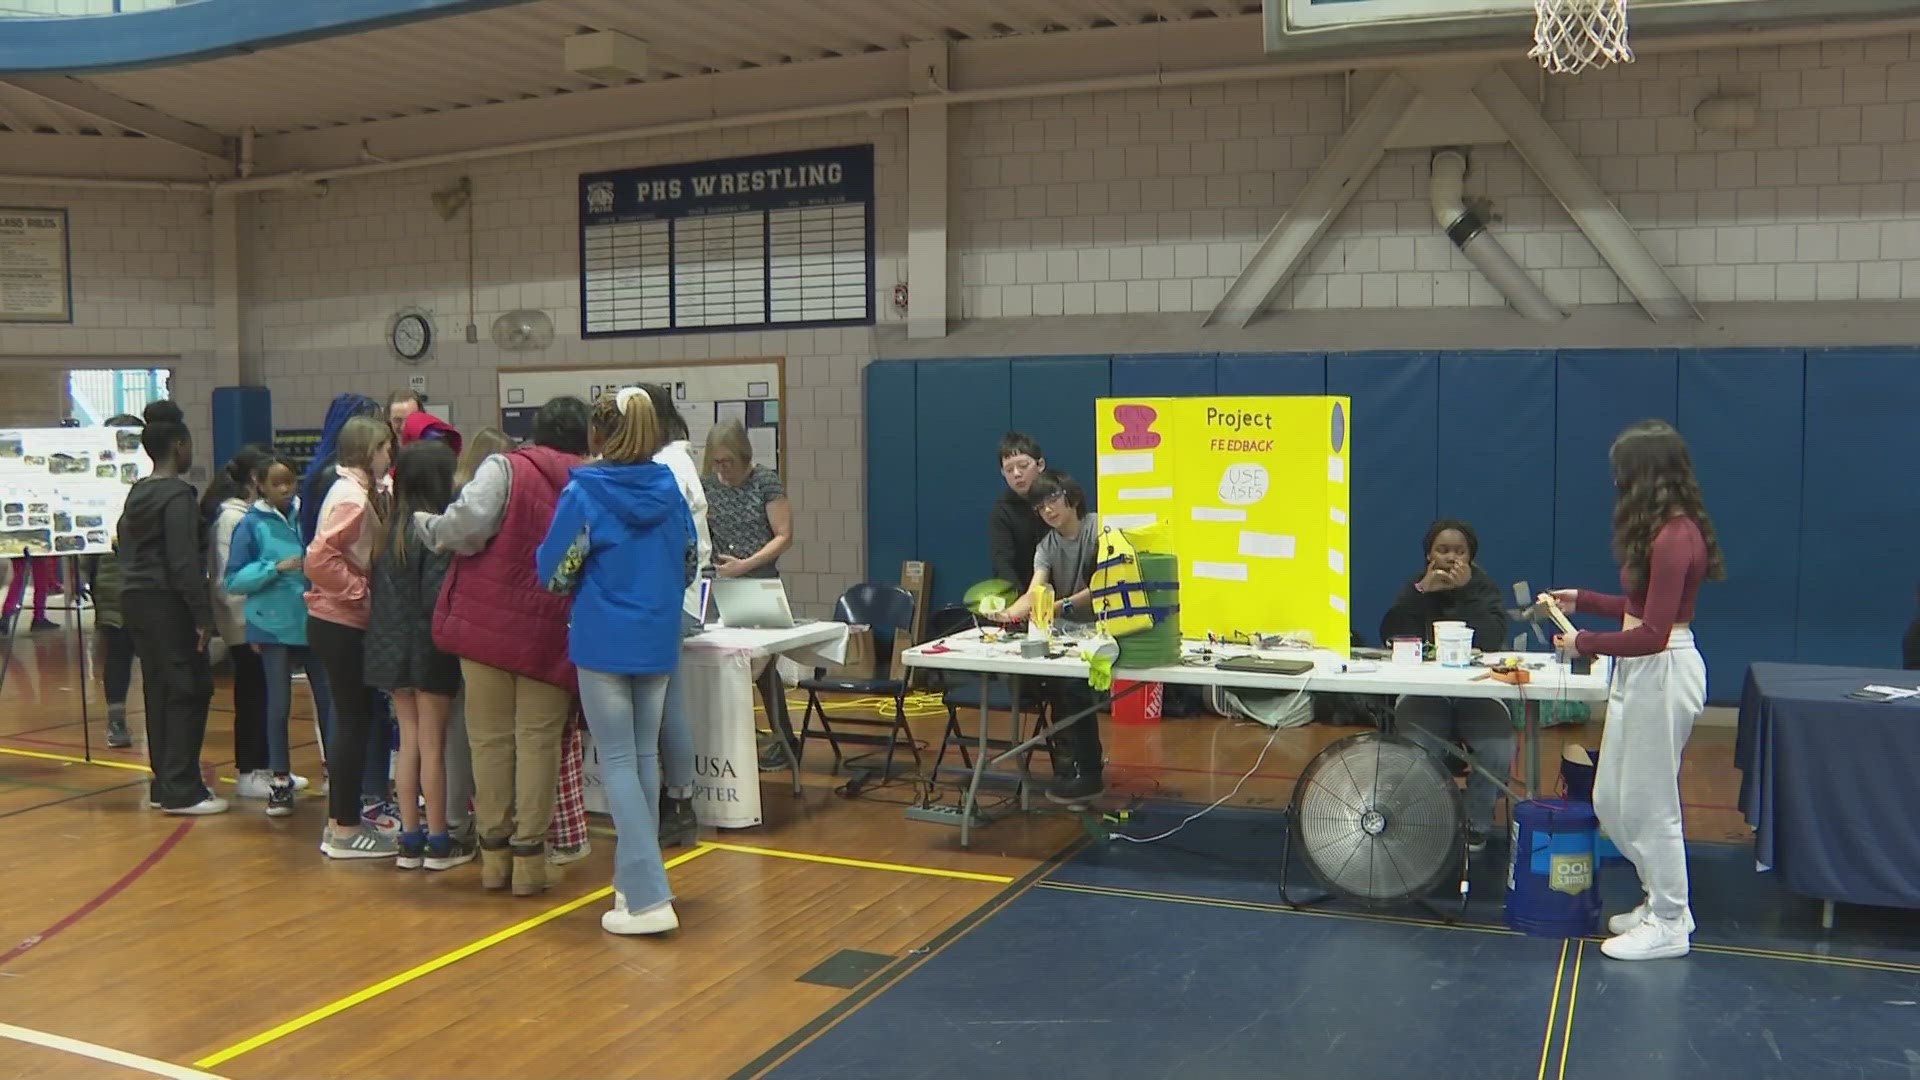 A total of 1,500 Portland Public Schools students are expected to visit the expo between three sites.